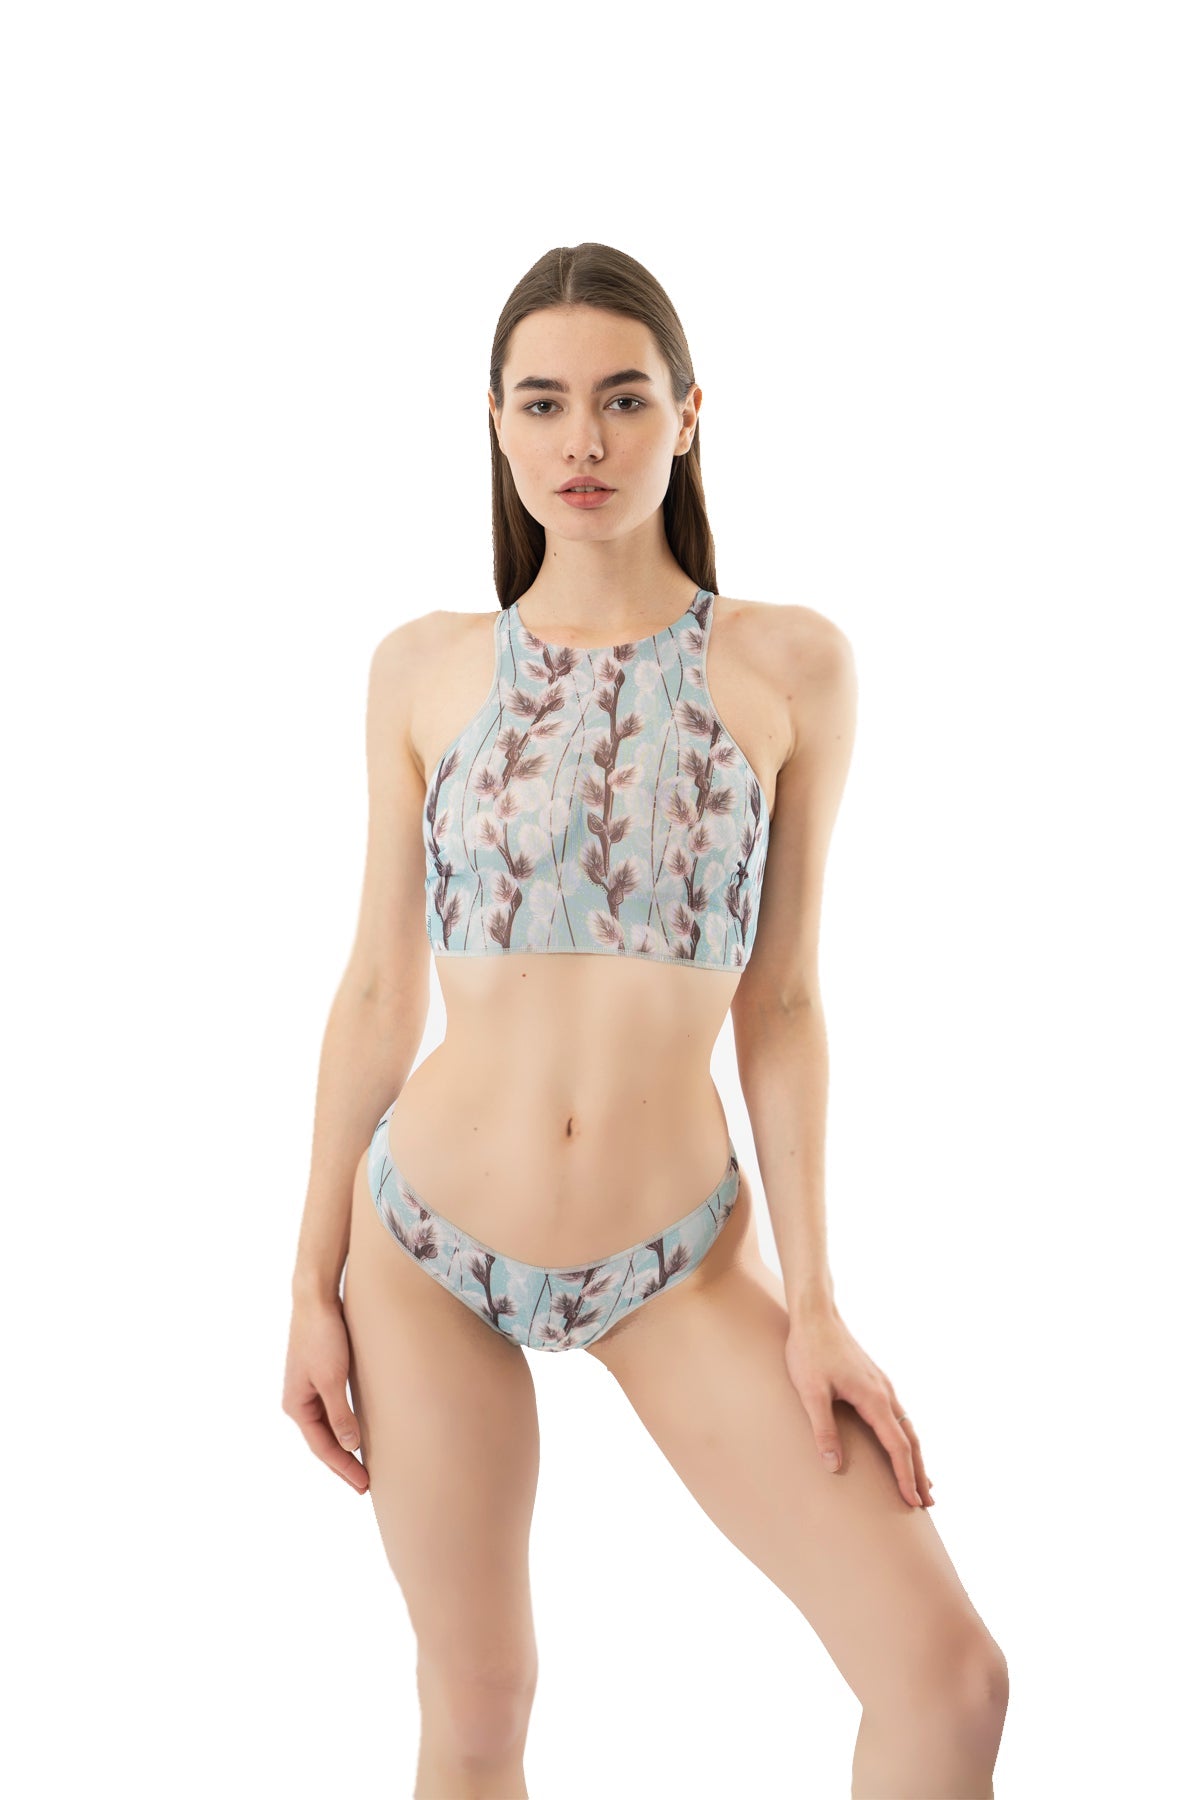 Explore our sustainable tan-through swimsuits featuring the sophisticated Willow print. This collection offers a swim top and classic bikini, now available at discounted prices. Embrace timeless luxury with a contemporary edge